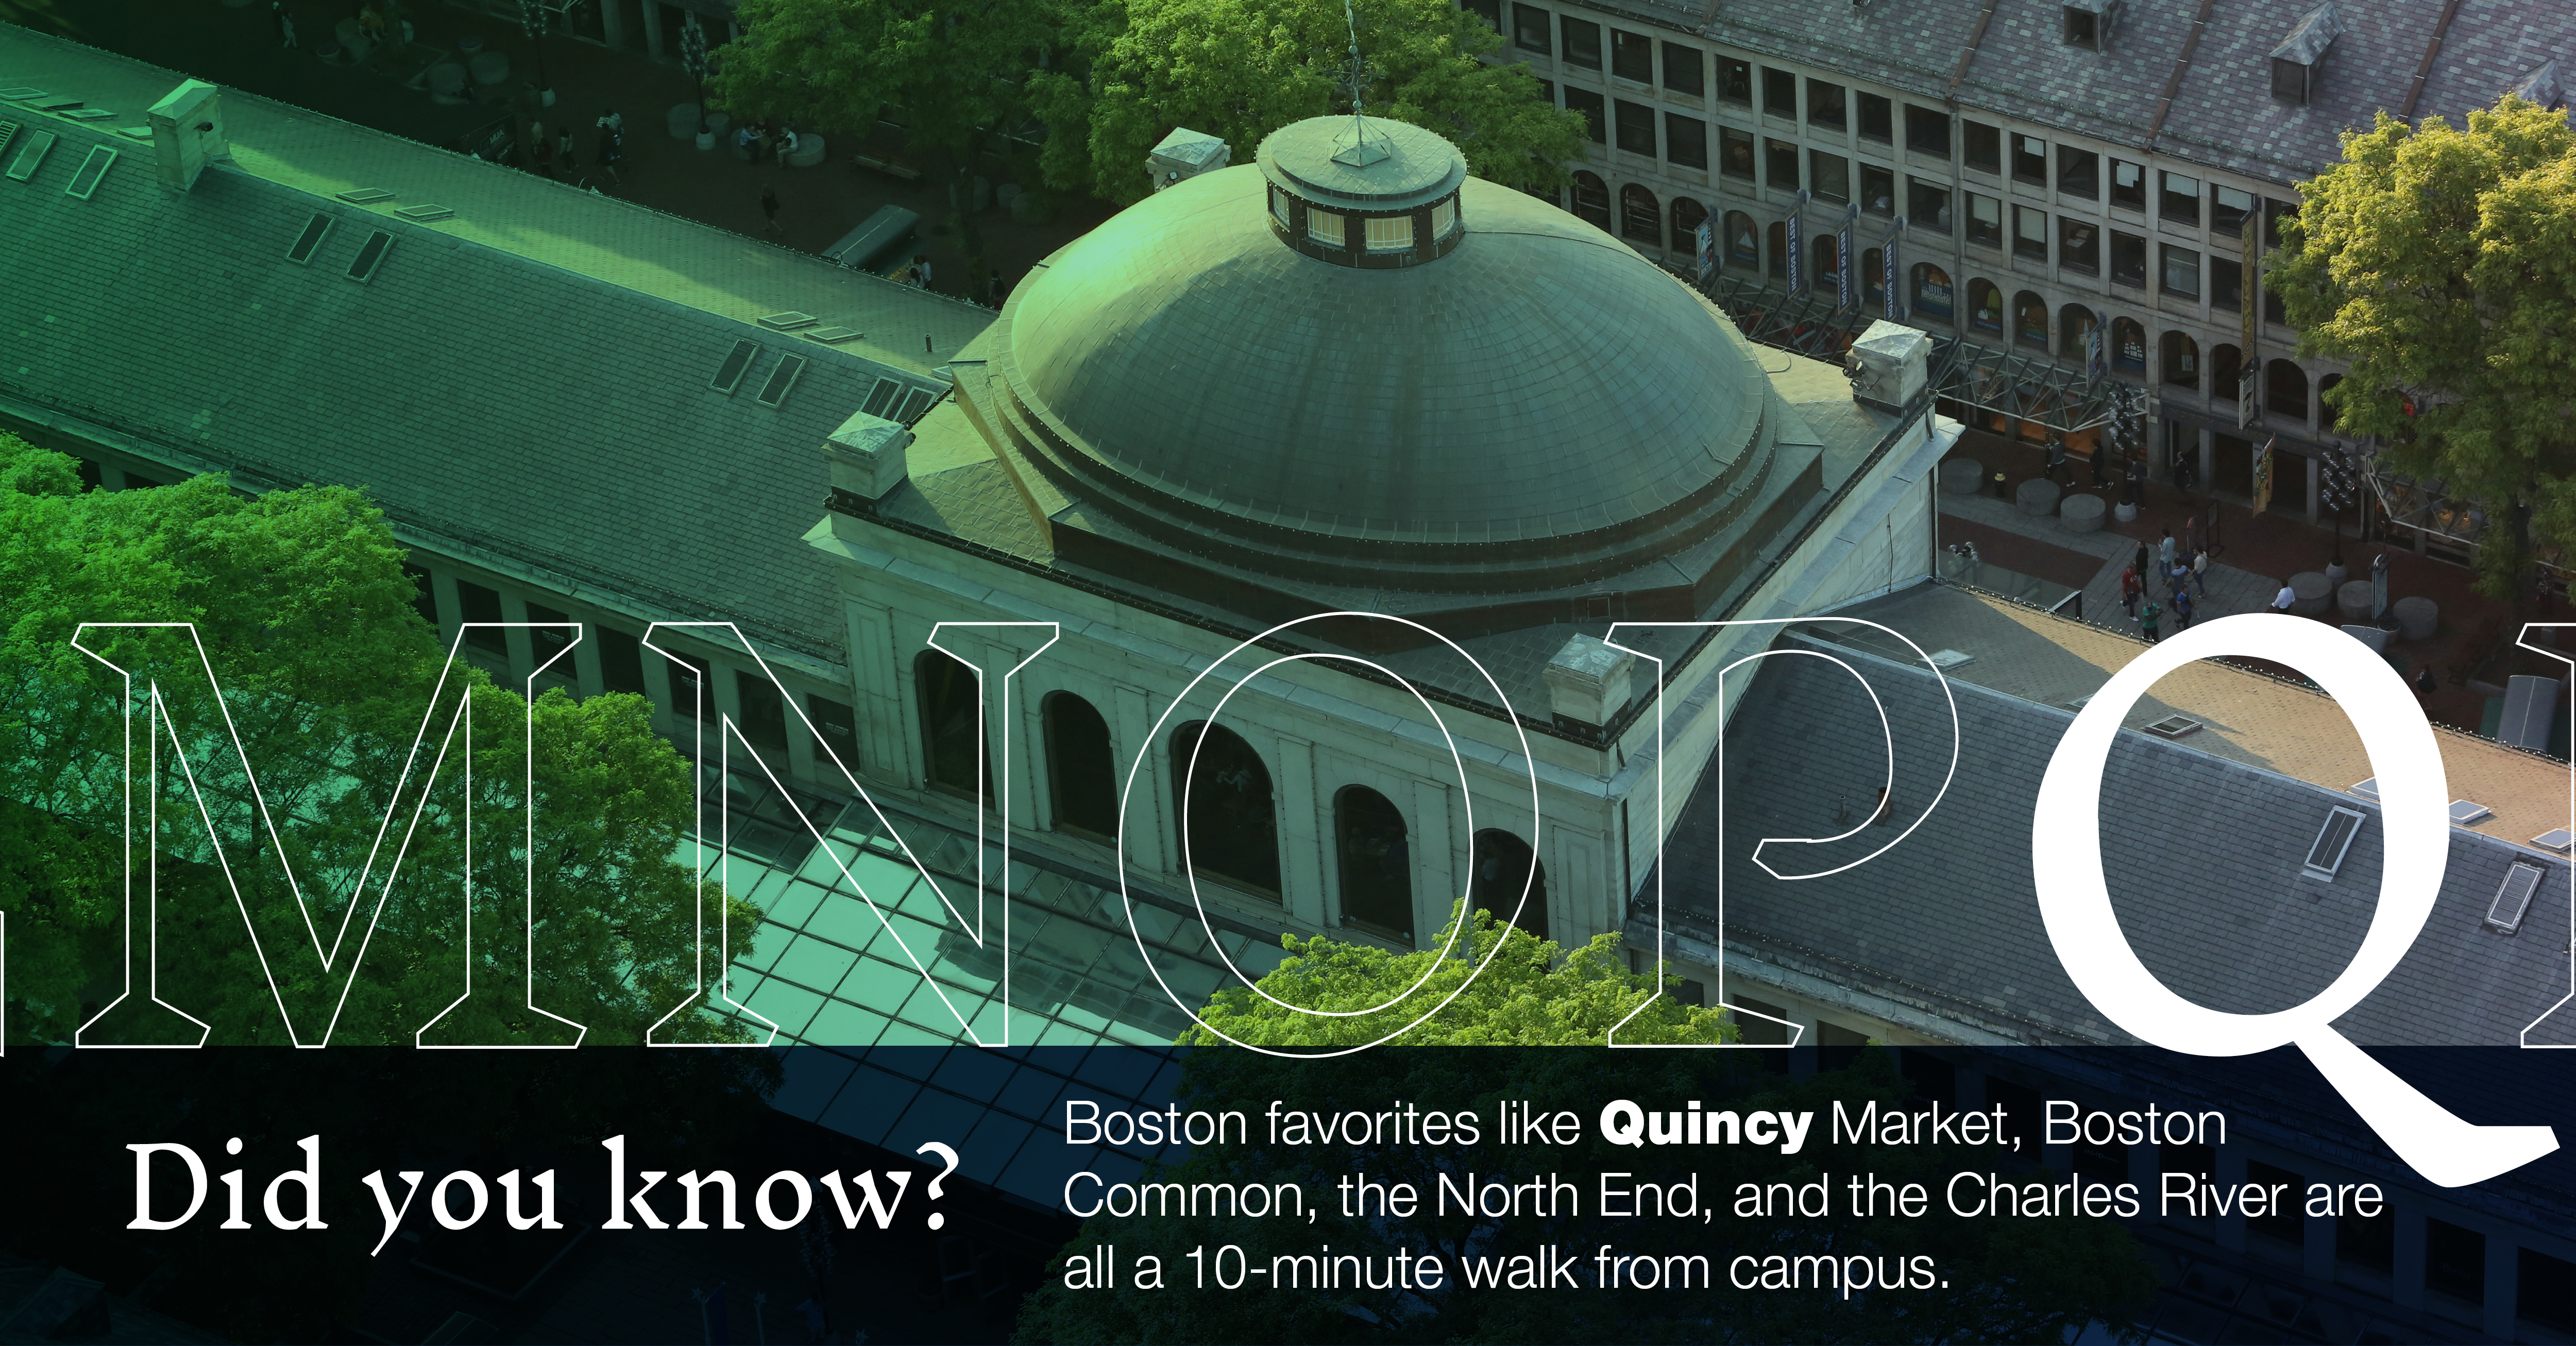 Q: [aerial view of Quincy Market] Boston favorites like Quincy Market, Boston Common, the North End, and the Charles River are all a 10-minute walk from campus.